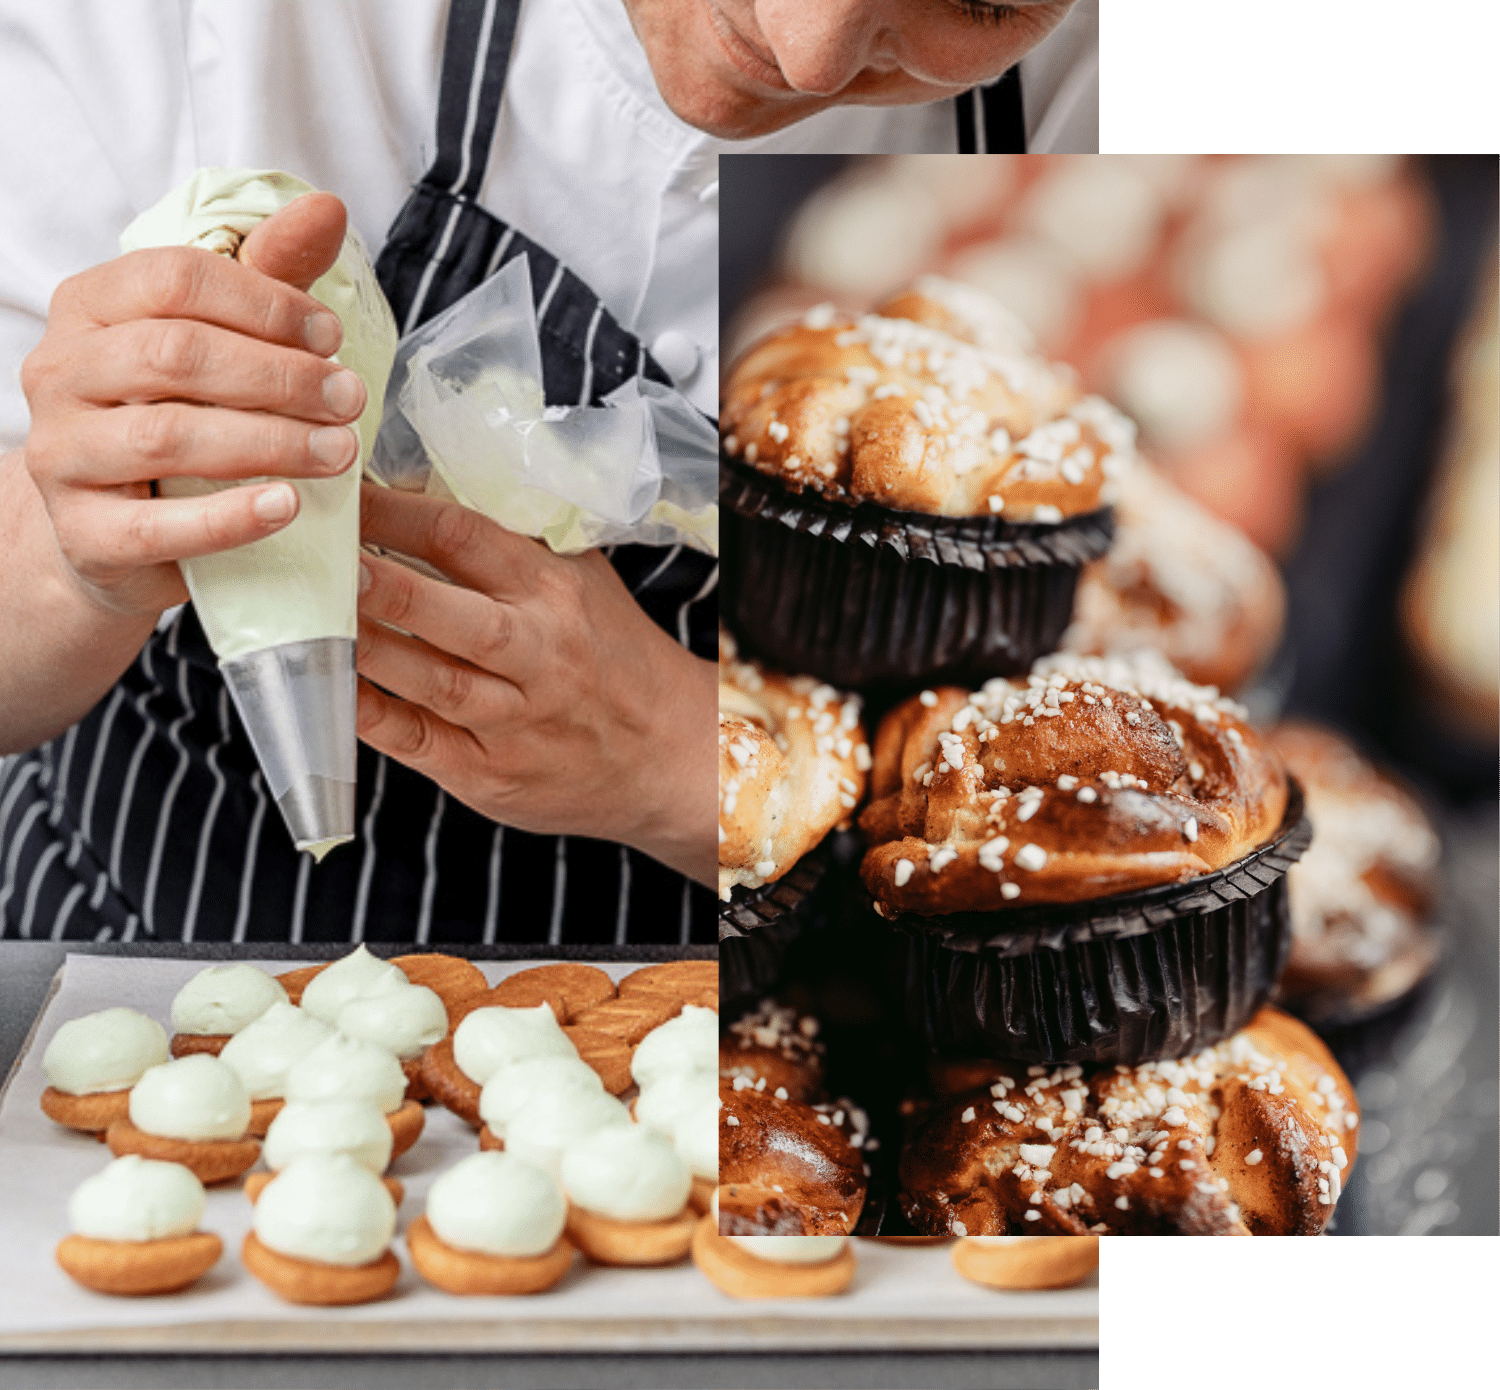 A pastry chef decorates cakes with icing and a close-up of cinnamon buns topped with pearl sugar in front of a fully booked conference room.